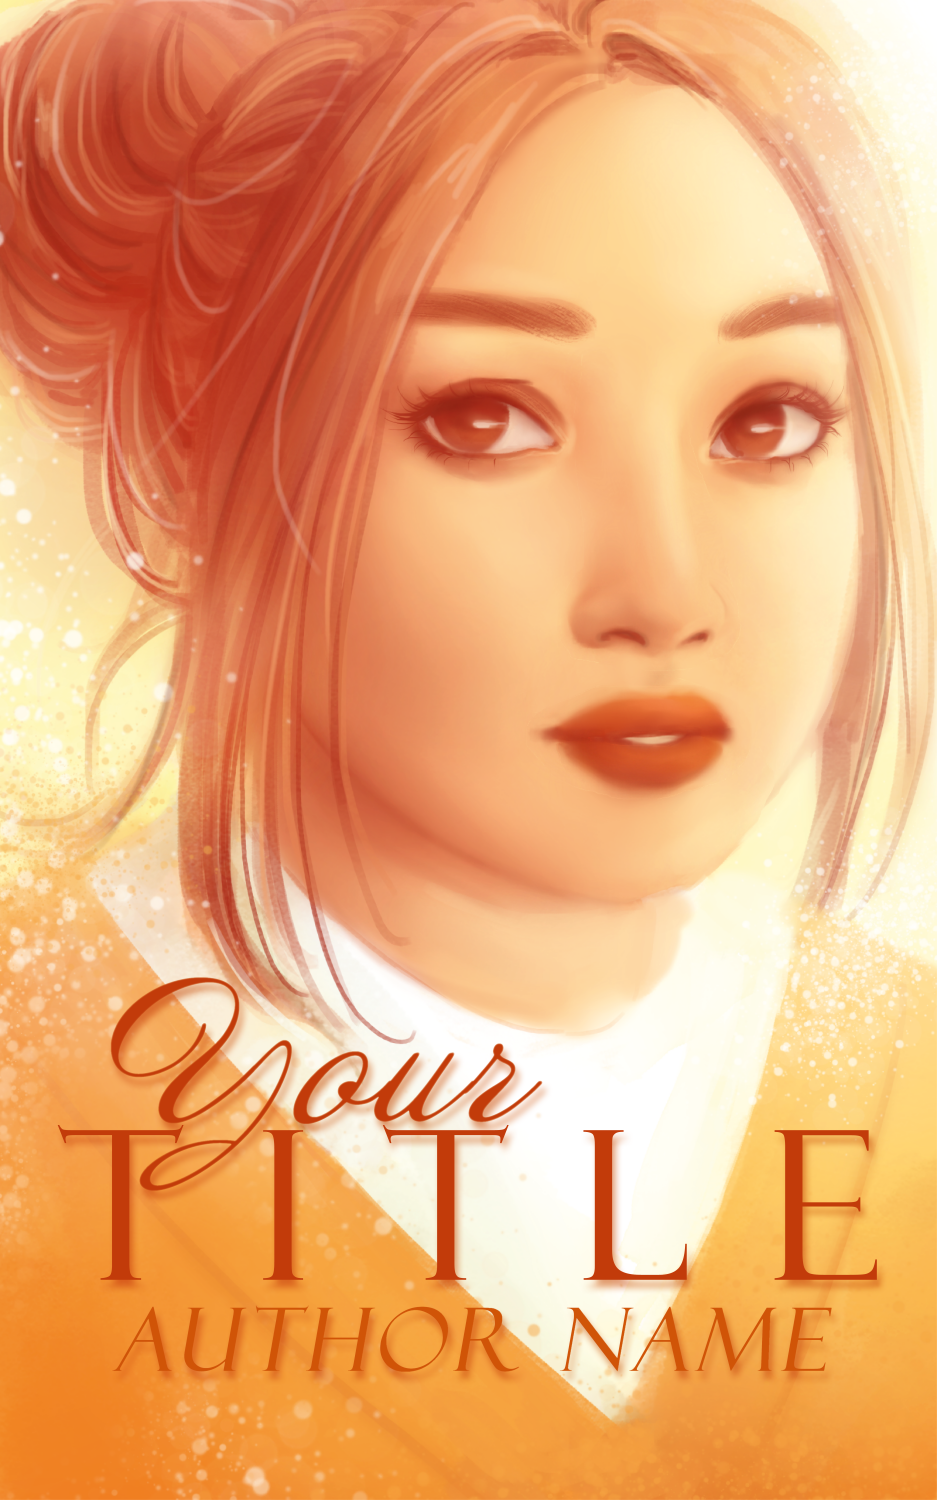 Soft And Warm Ya Cover W Plus Size Girl The Book Cover Designer